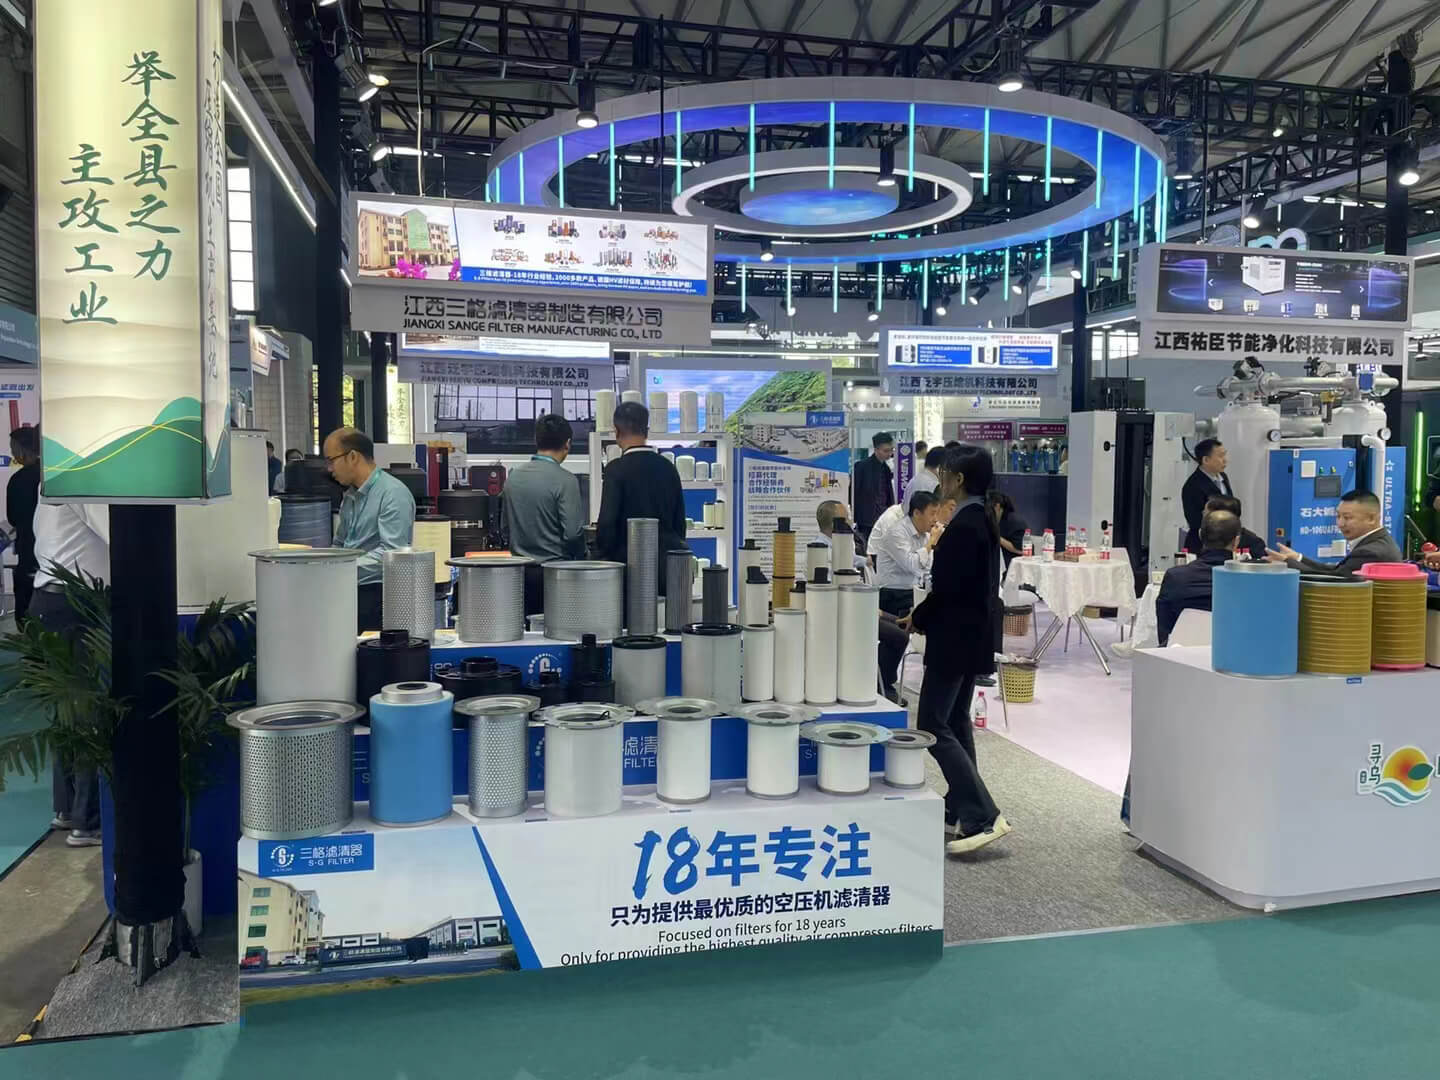 S.G Fiilter 2023-5-22 to participate in air compressor exhibition